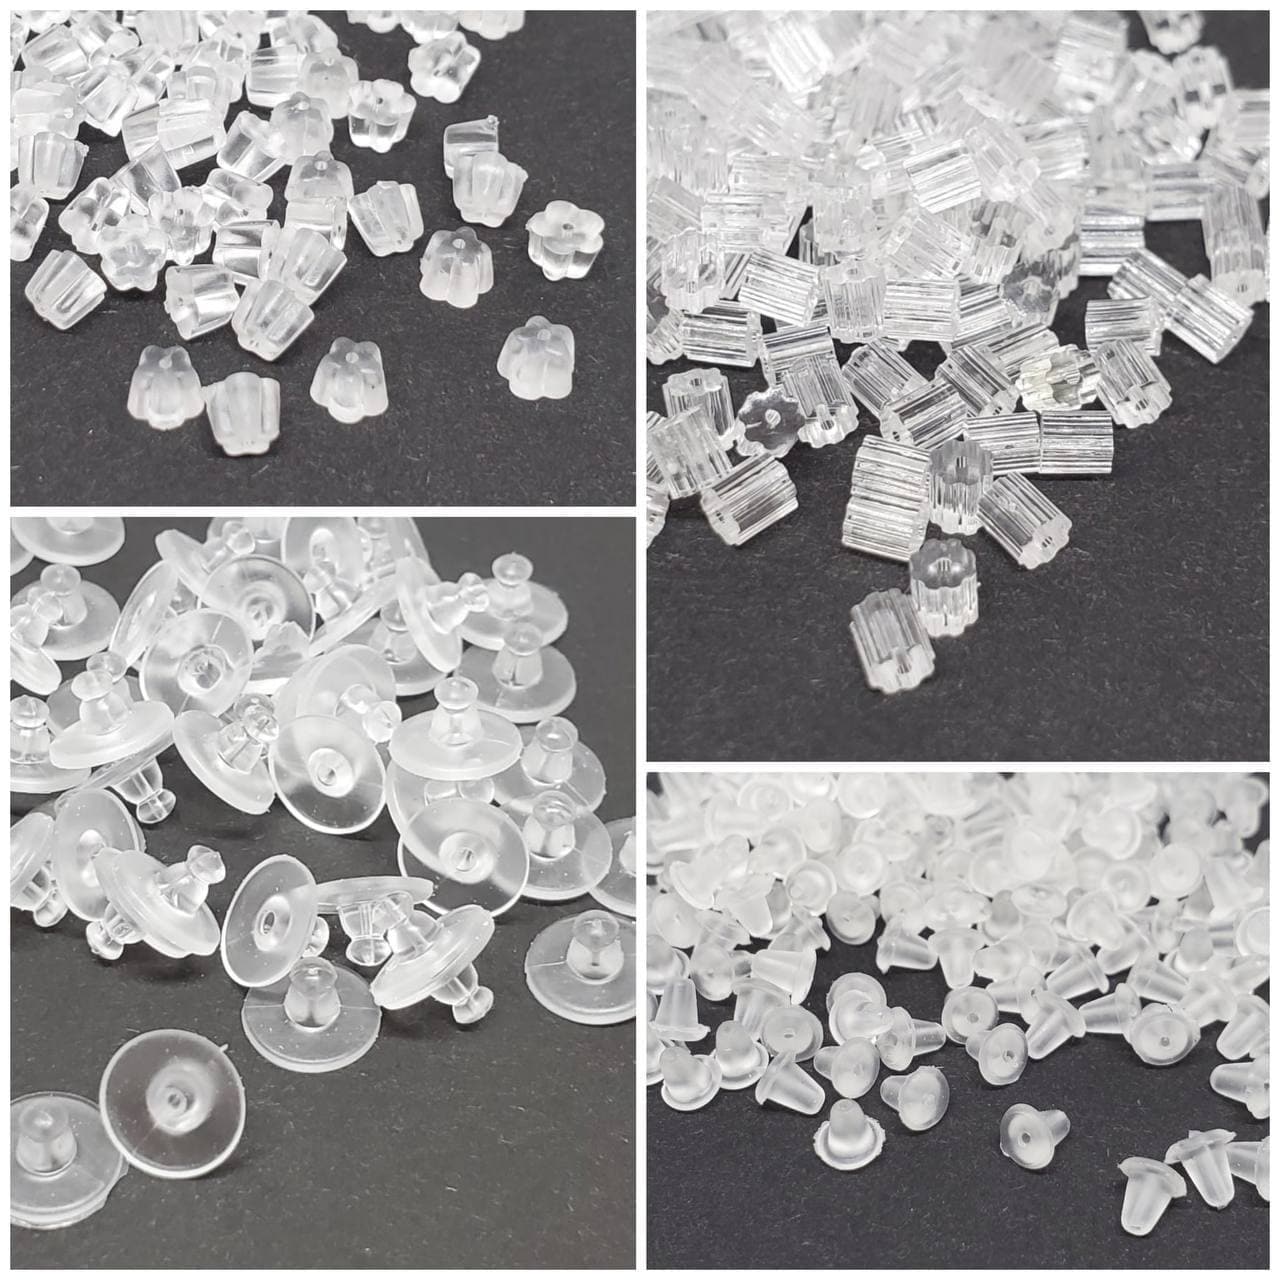 Plastic Clear Rubber Earring Backs Silicone Earrings Stoppers Backing  Replacements Earrings Jewelry Finding From Vecuteboutique, $10.16